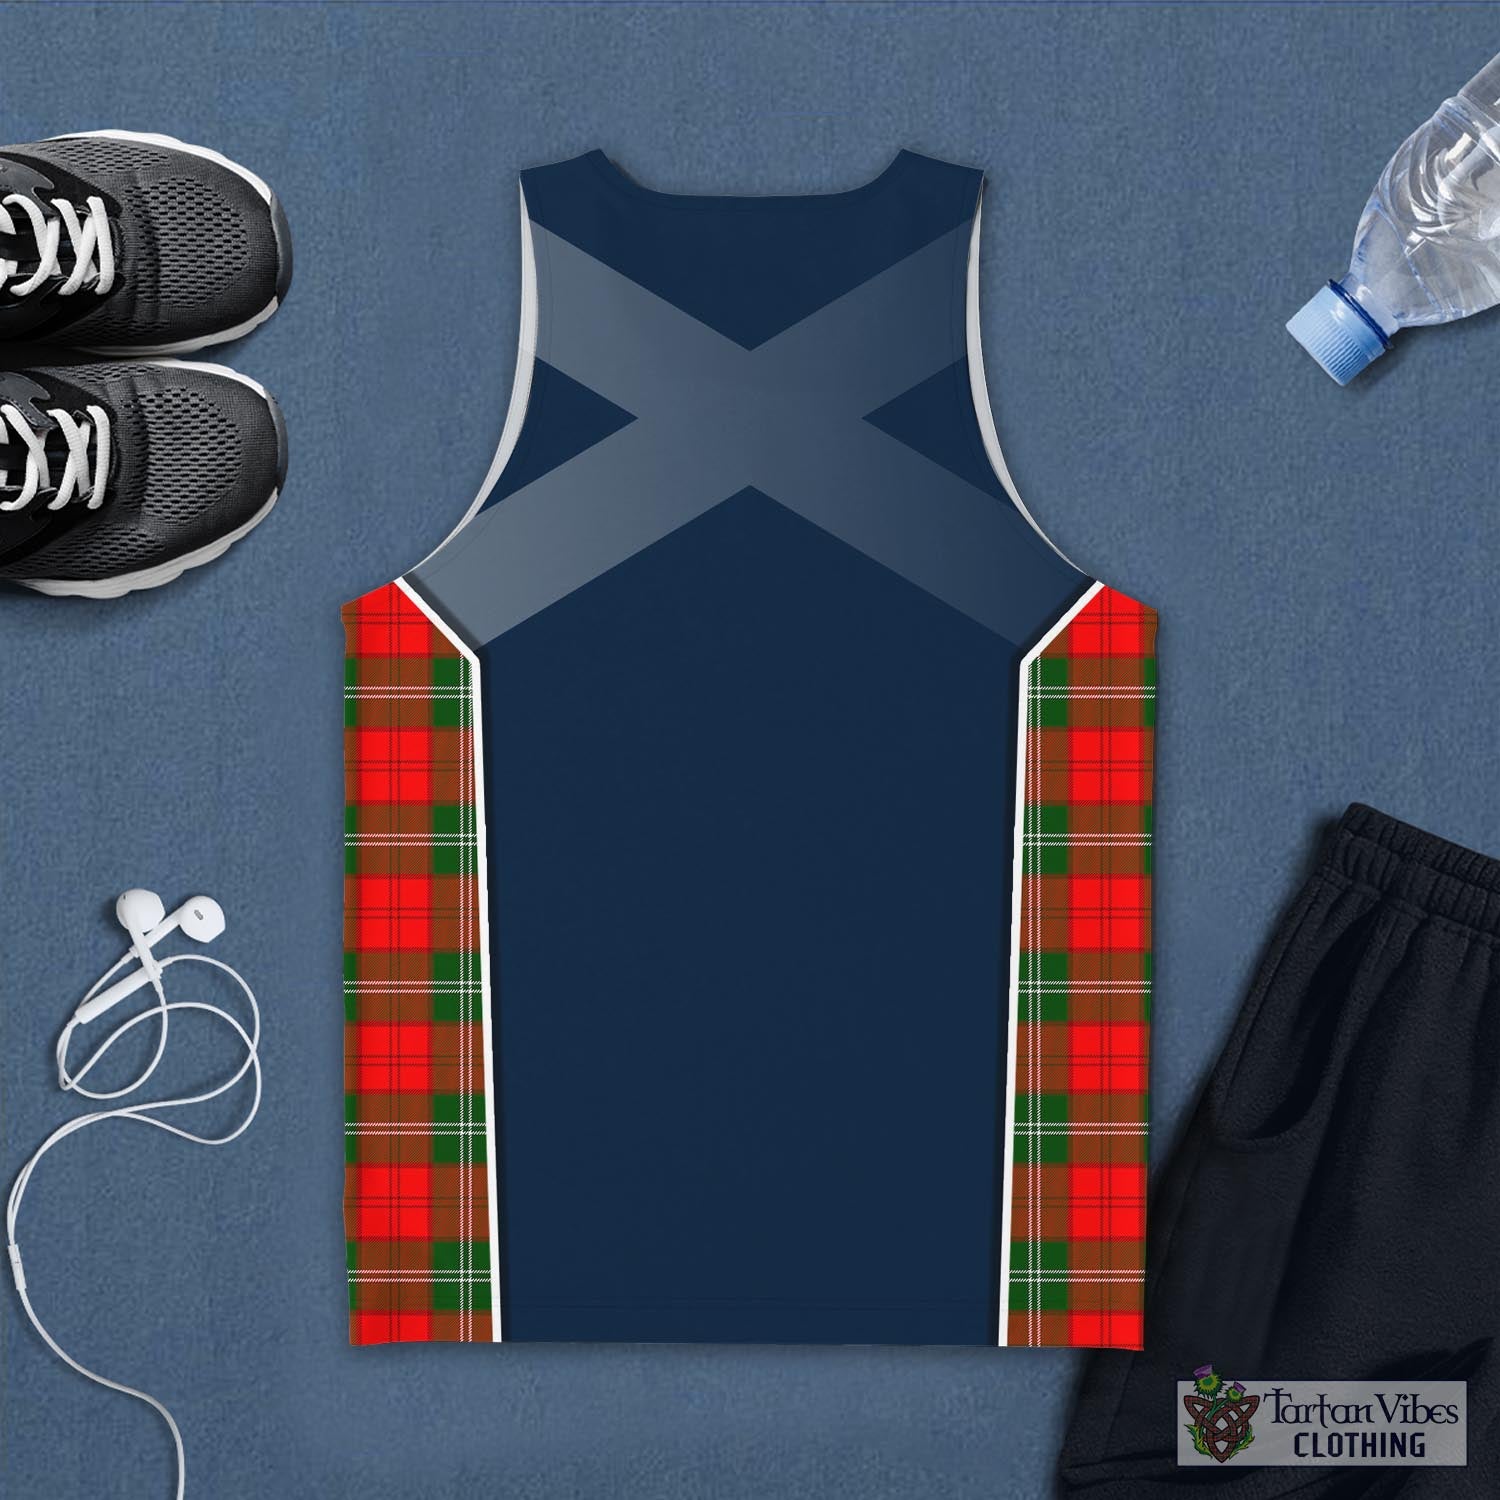 Tartan Vibes Clothing Lennox Modern Tartan Men's Tanks Top with Family Crest and Scottish Thistle Vibes Sport Style